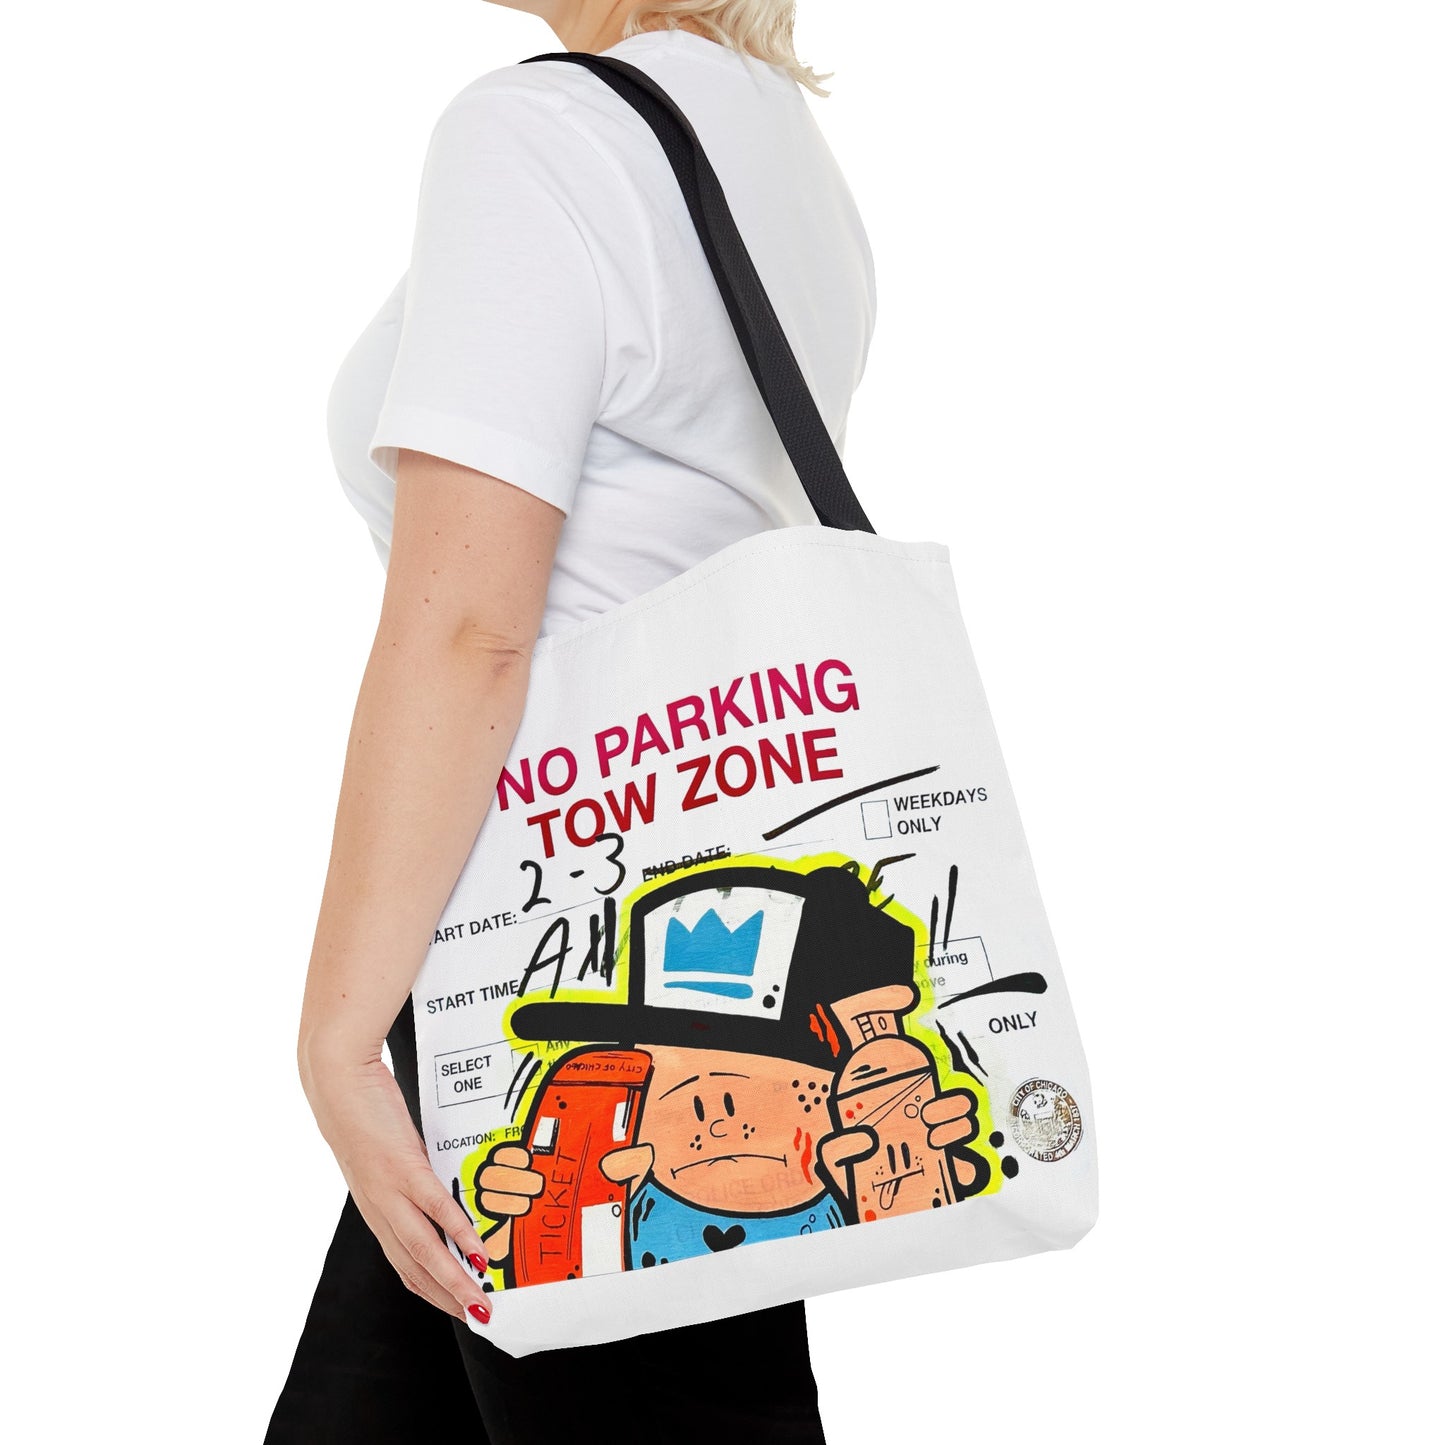 NO PARKING / TOW ZONE TOTE BAG